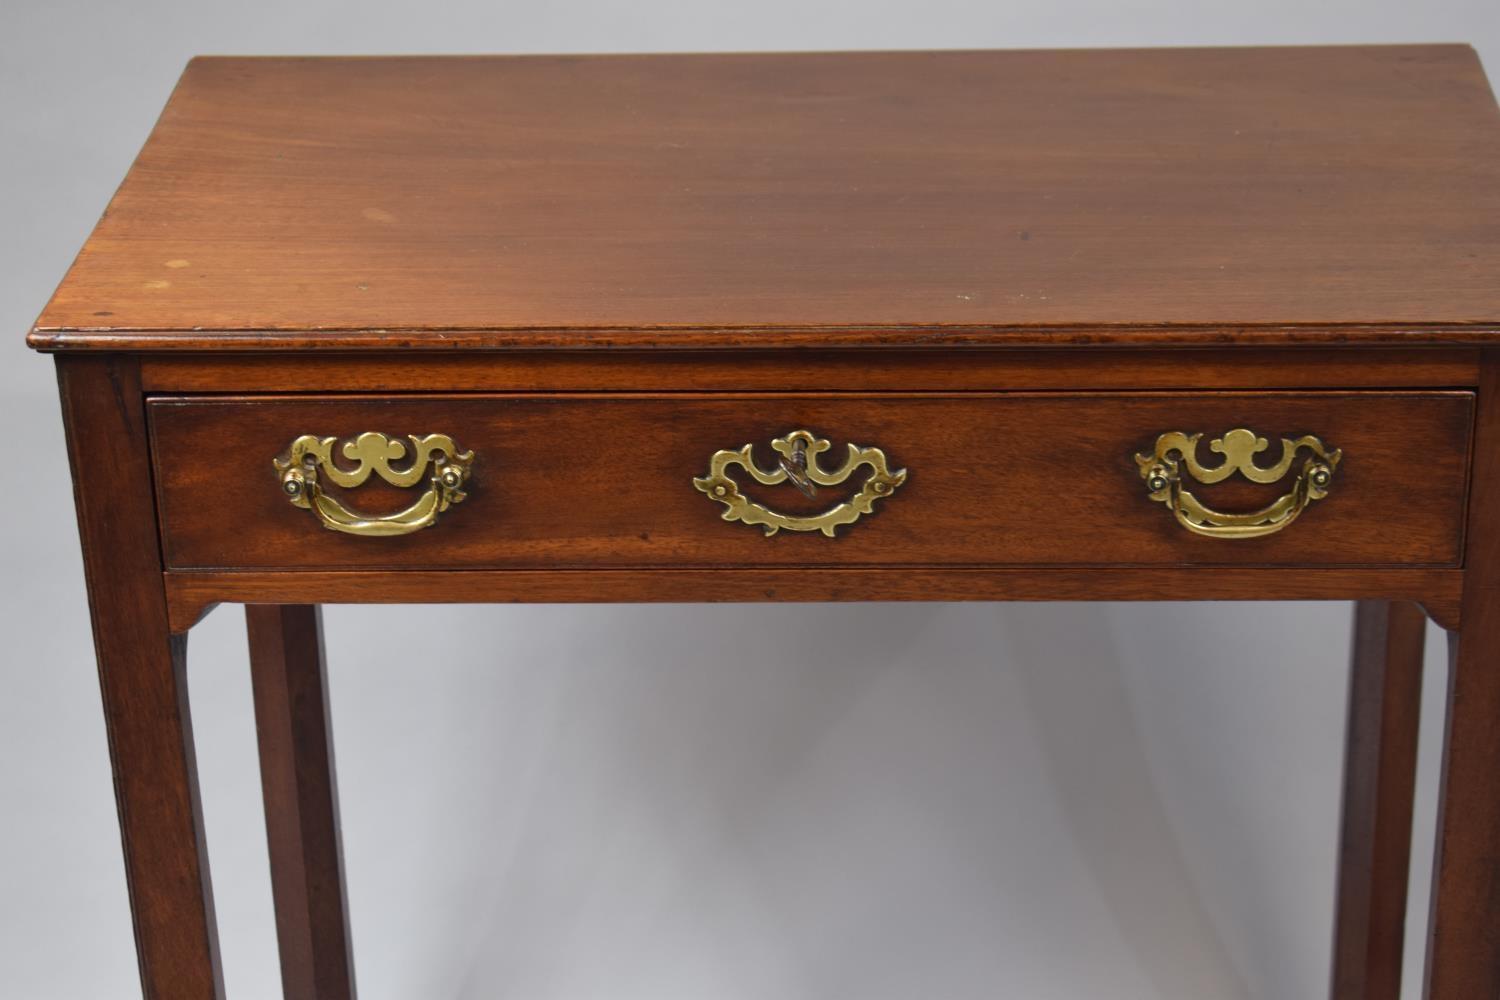 A 18th Century George III Mahogany Side Table with a One Piece Solid Top over a Single Drawer with - Image 3 of 3